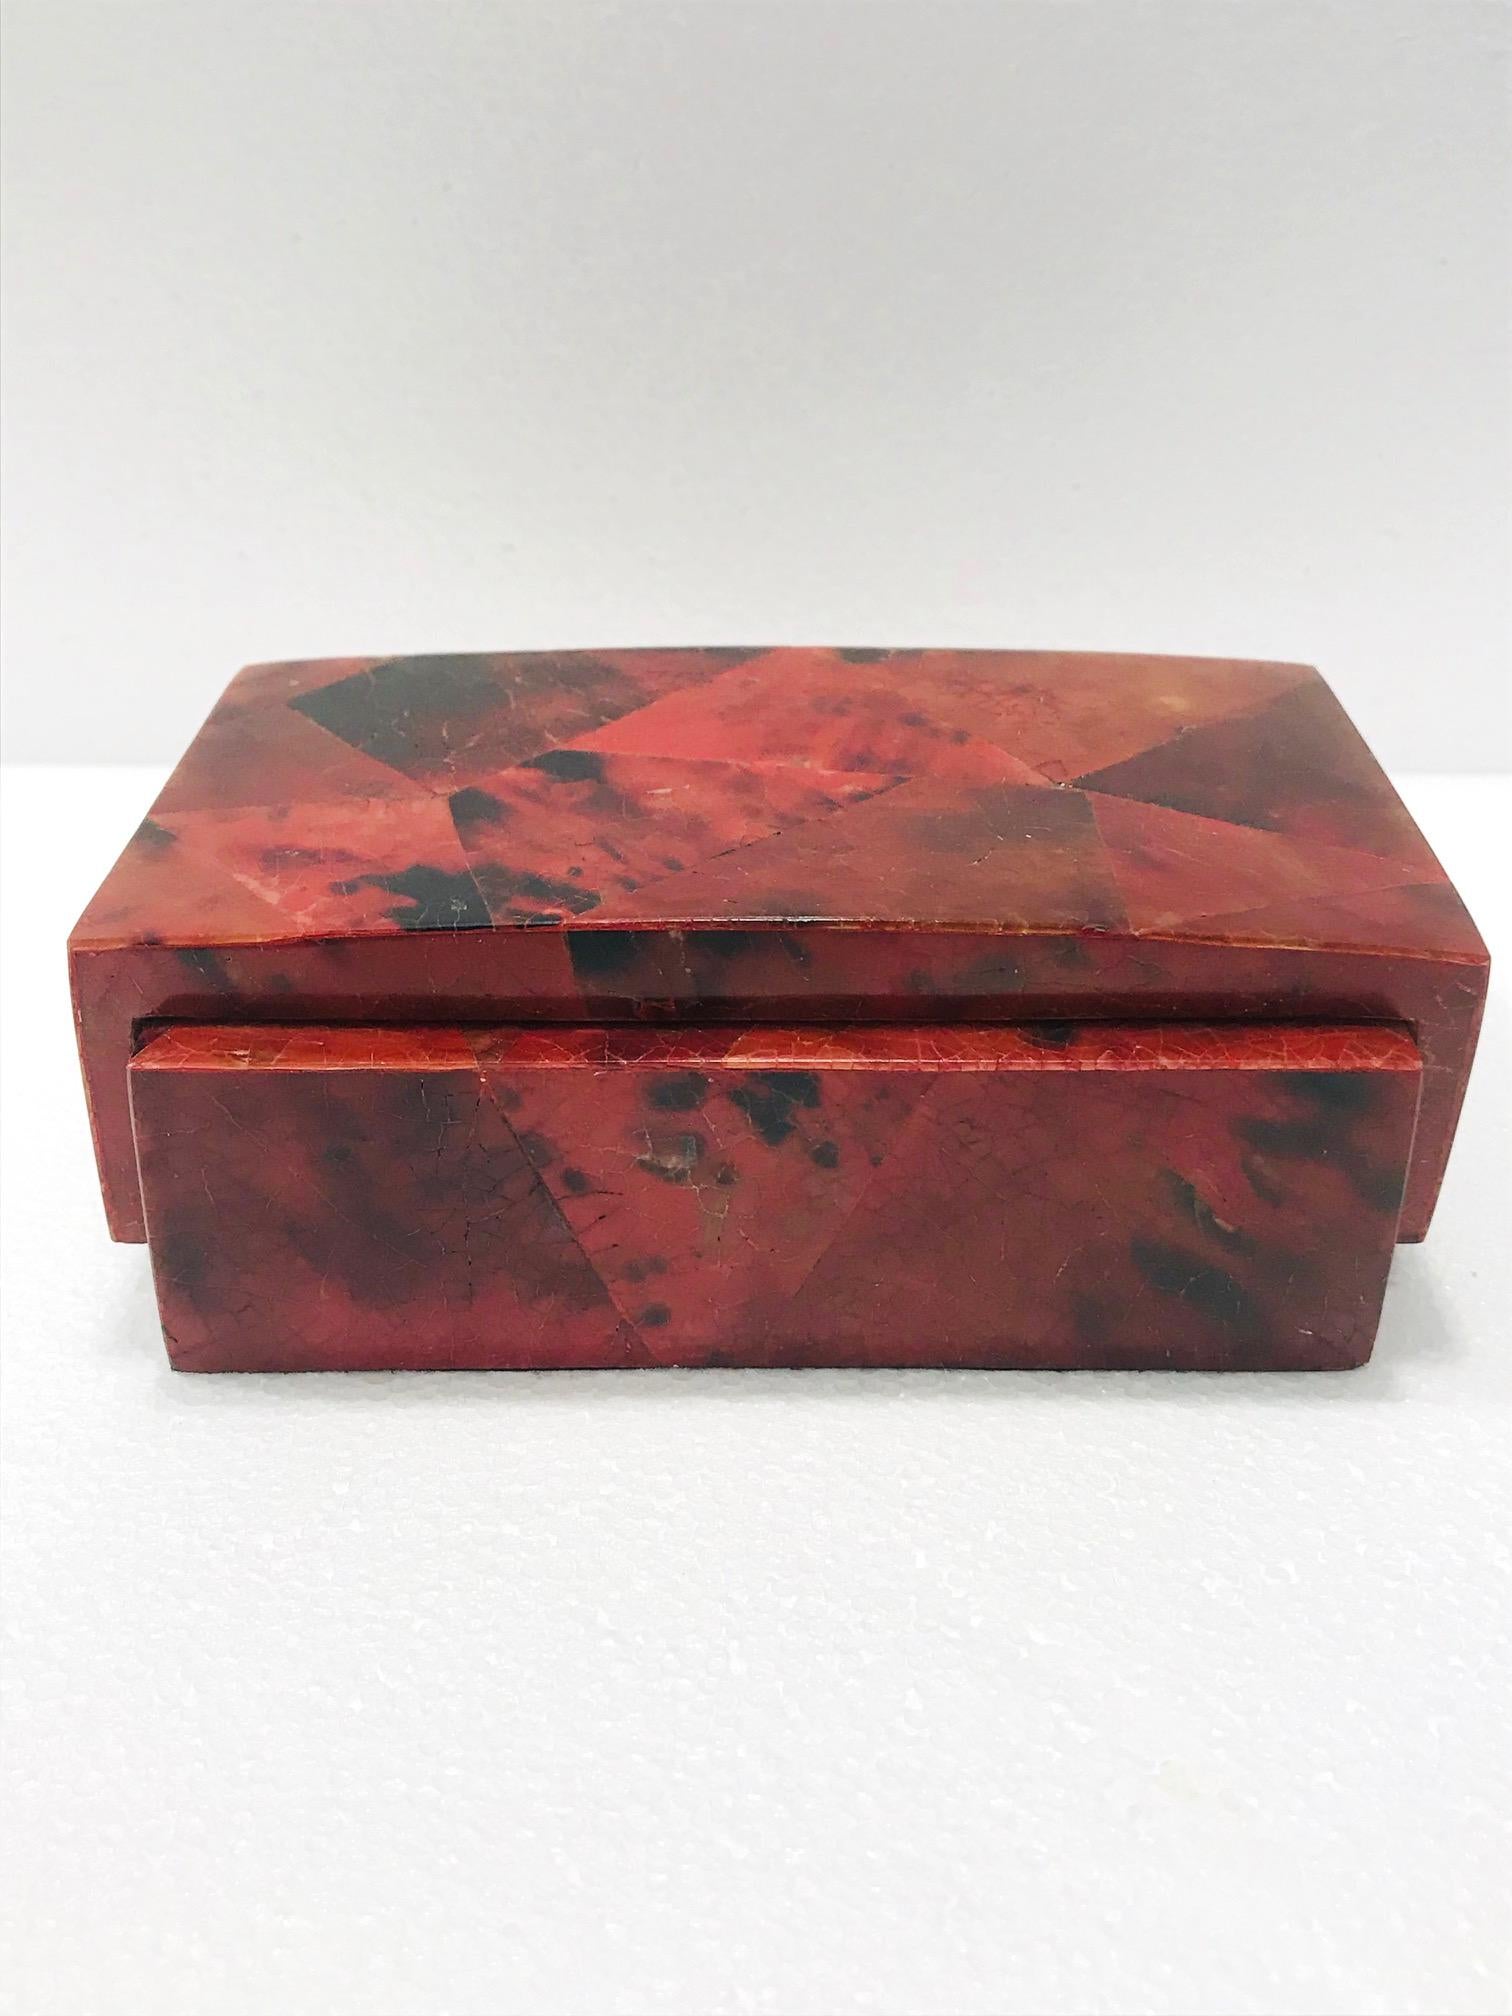 Organic modern desk accessory, lidded box, or jewelry box by R&Y Augousti. All handcrafted in exotic materials featuring lacquered and hand dyed pen-shell over a wood frame. The box features mosaic shell inlays in beautiful hues of red and black.